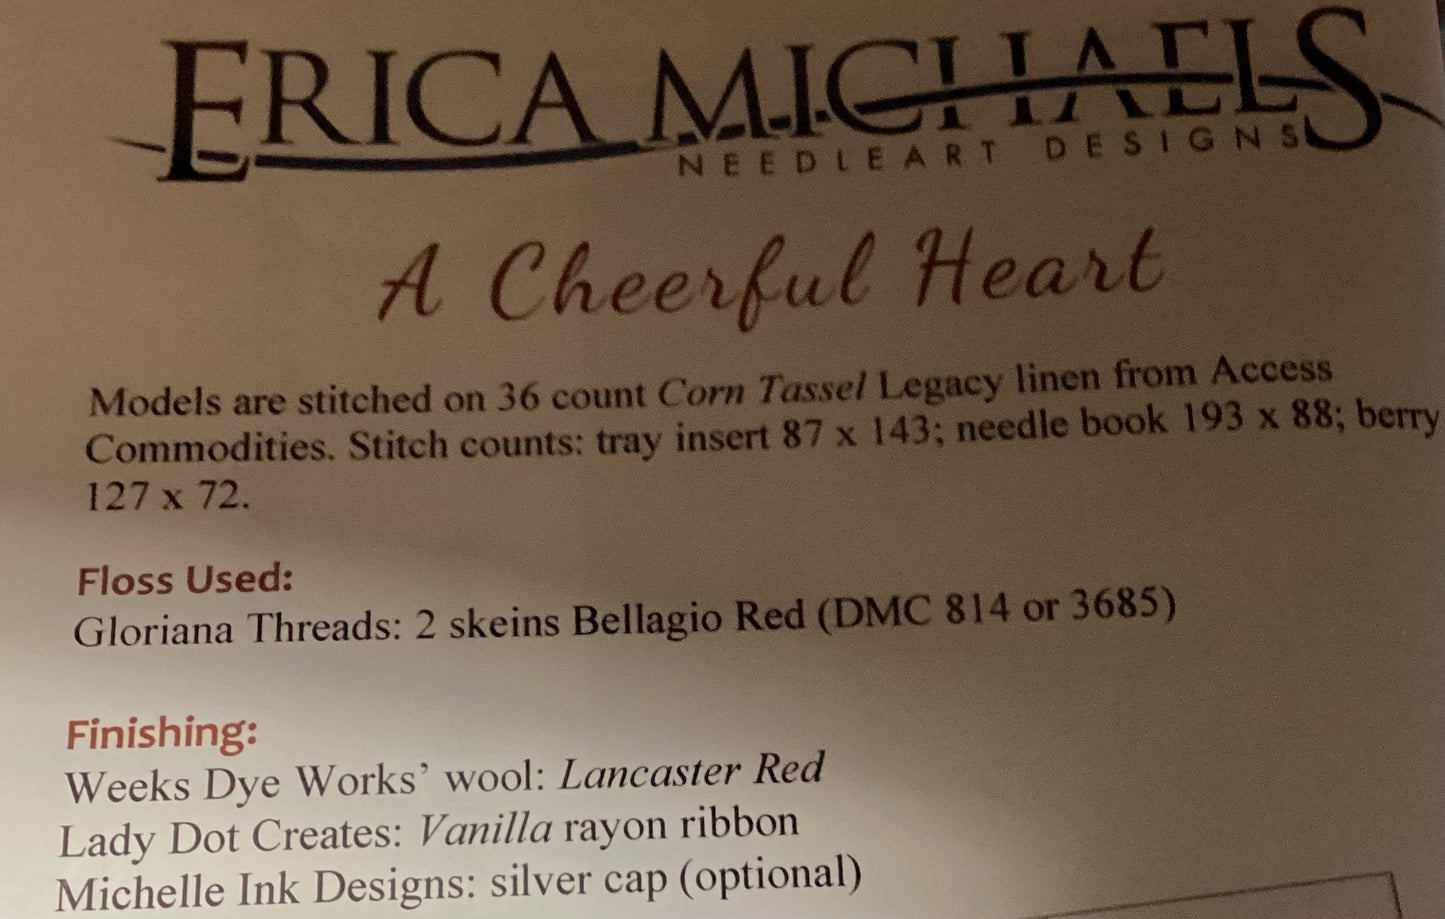 A Cheerful Heart By Erica Michaels